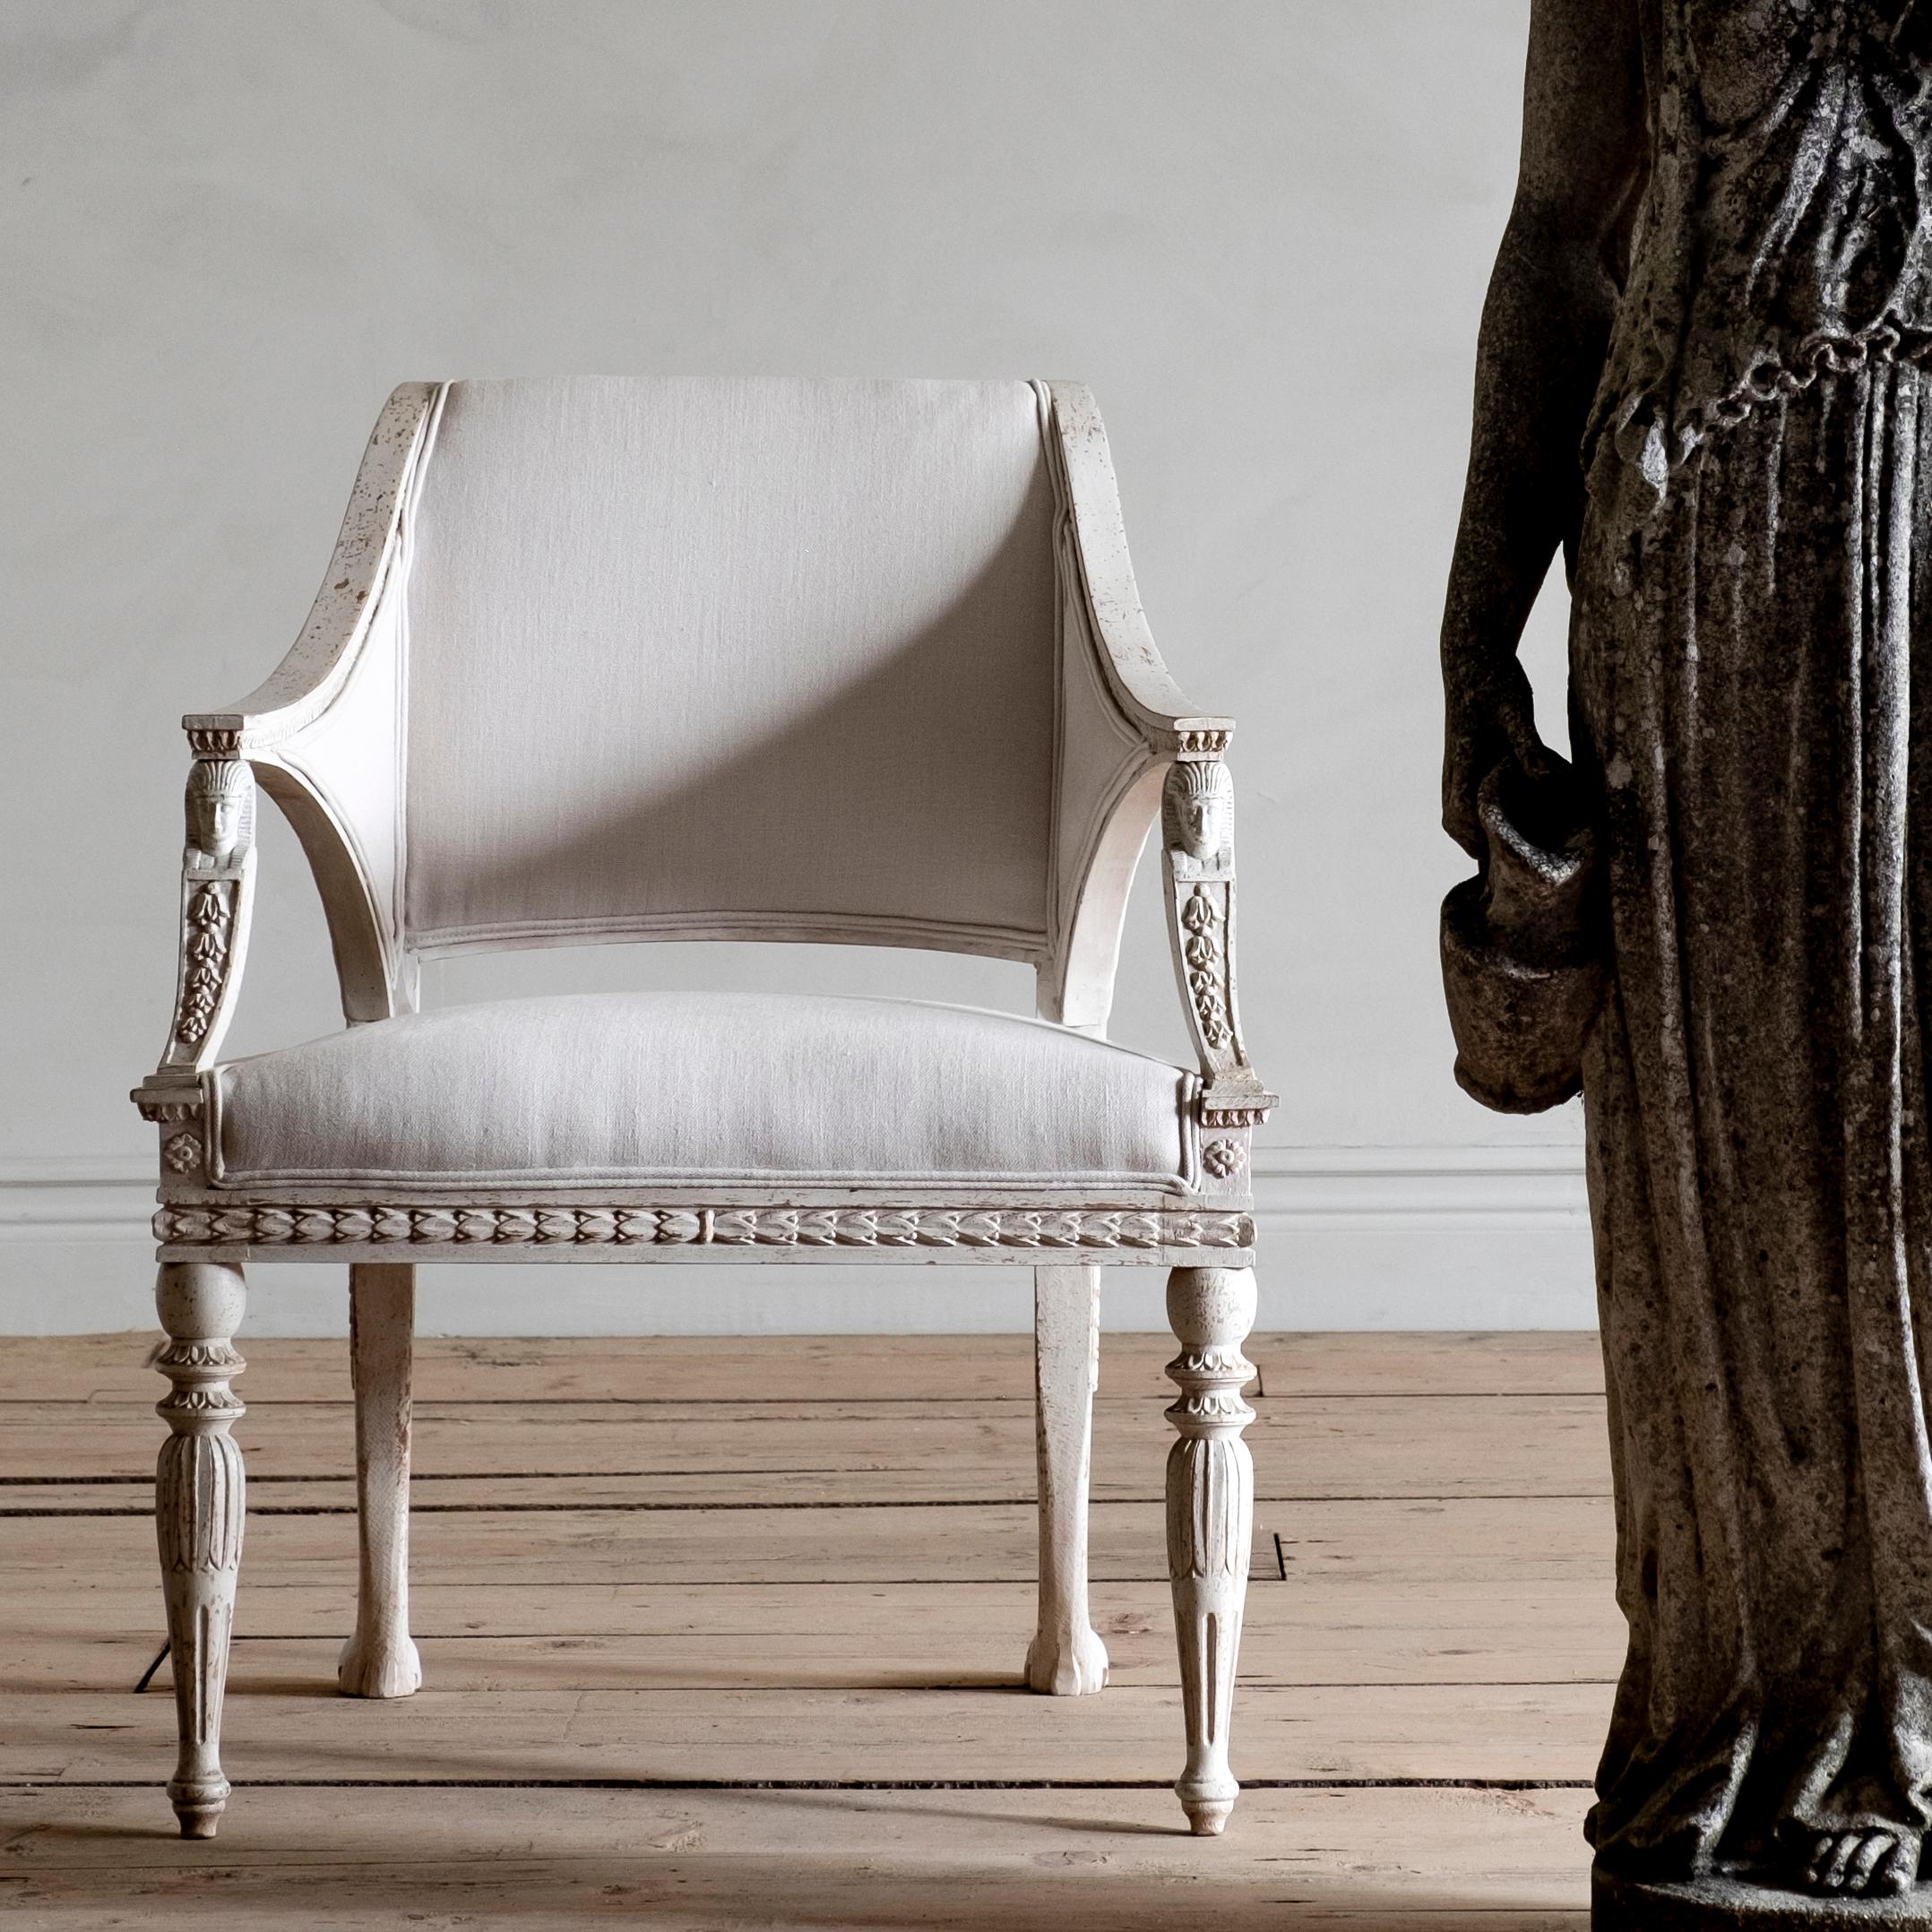 Limited edition reproductions by D. Larsson, inspired by the finest 18th - 19th-century Swedish furniture.

STOCKHOLM, This Gustavian style armchair is inspired by one of the finest armchairs from the Gustavian period. This model was delivered to